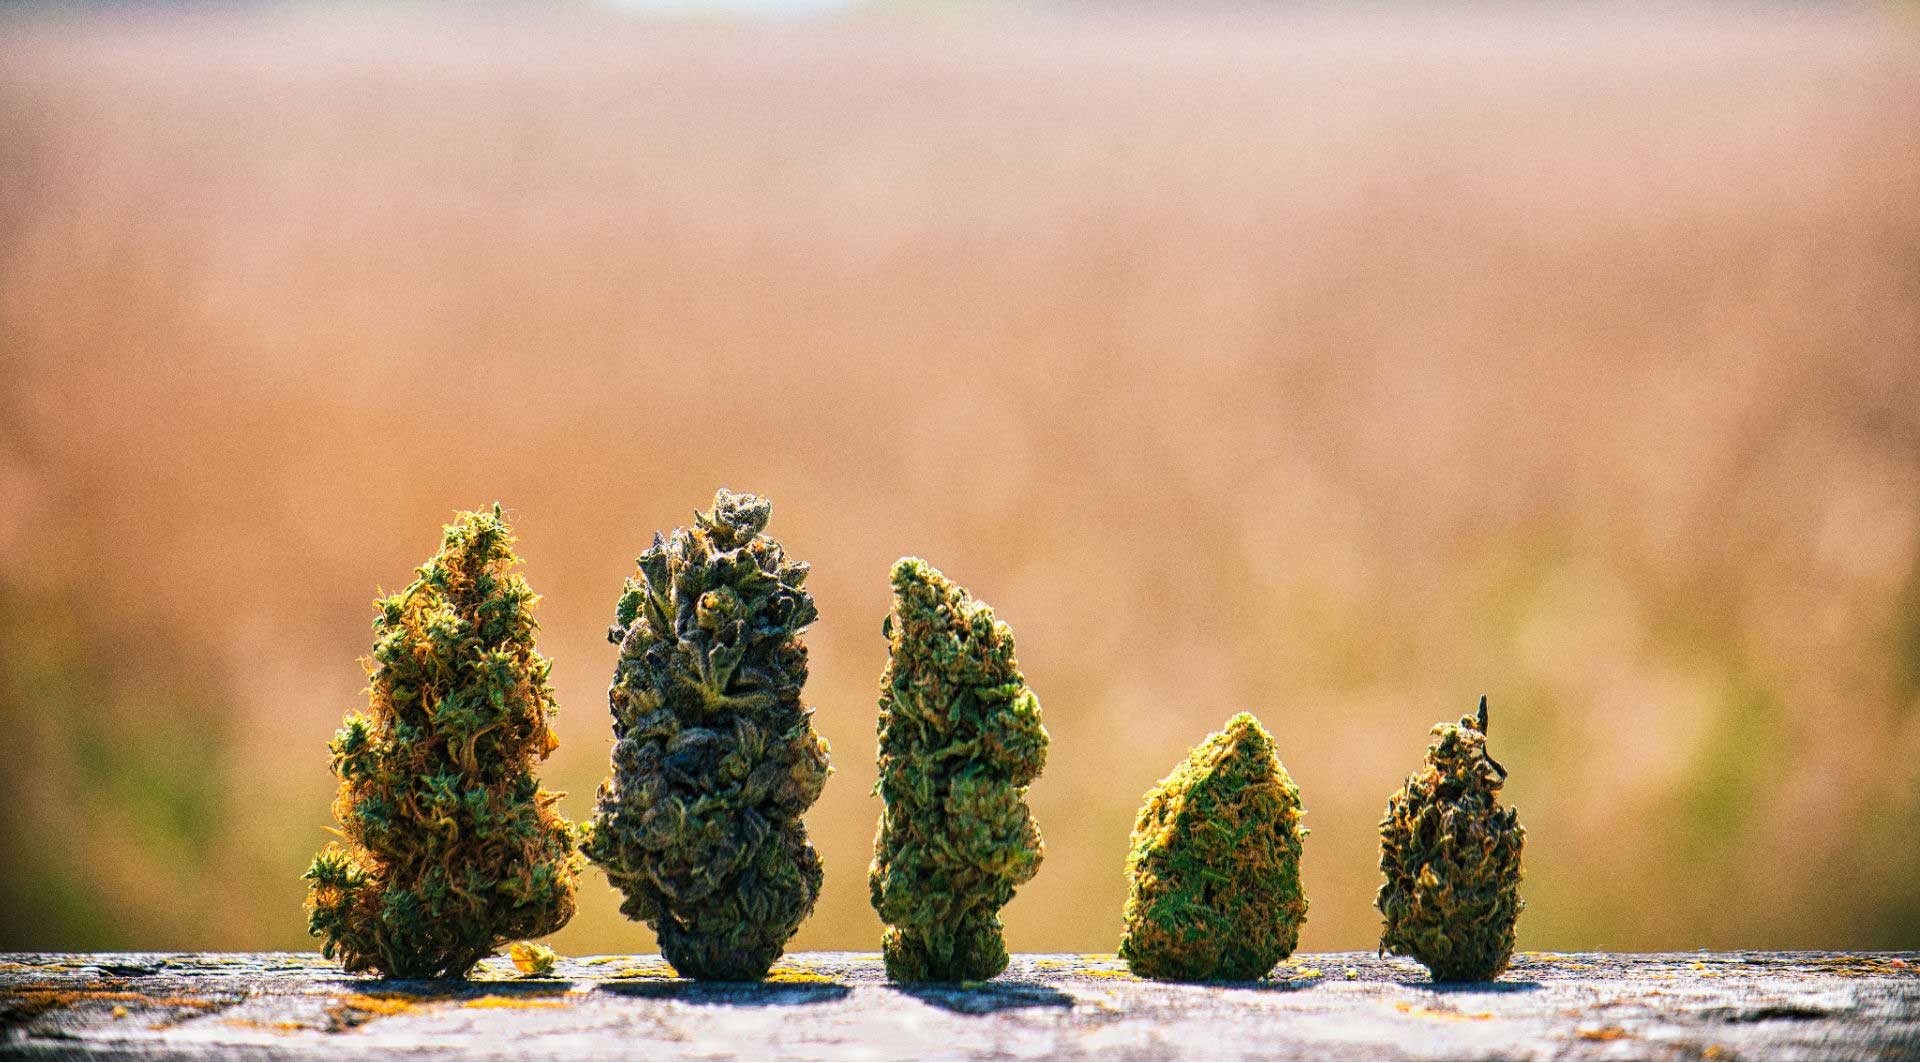 Five different cannabis nugs (flower) representing variation in cannabis plants and strains.